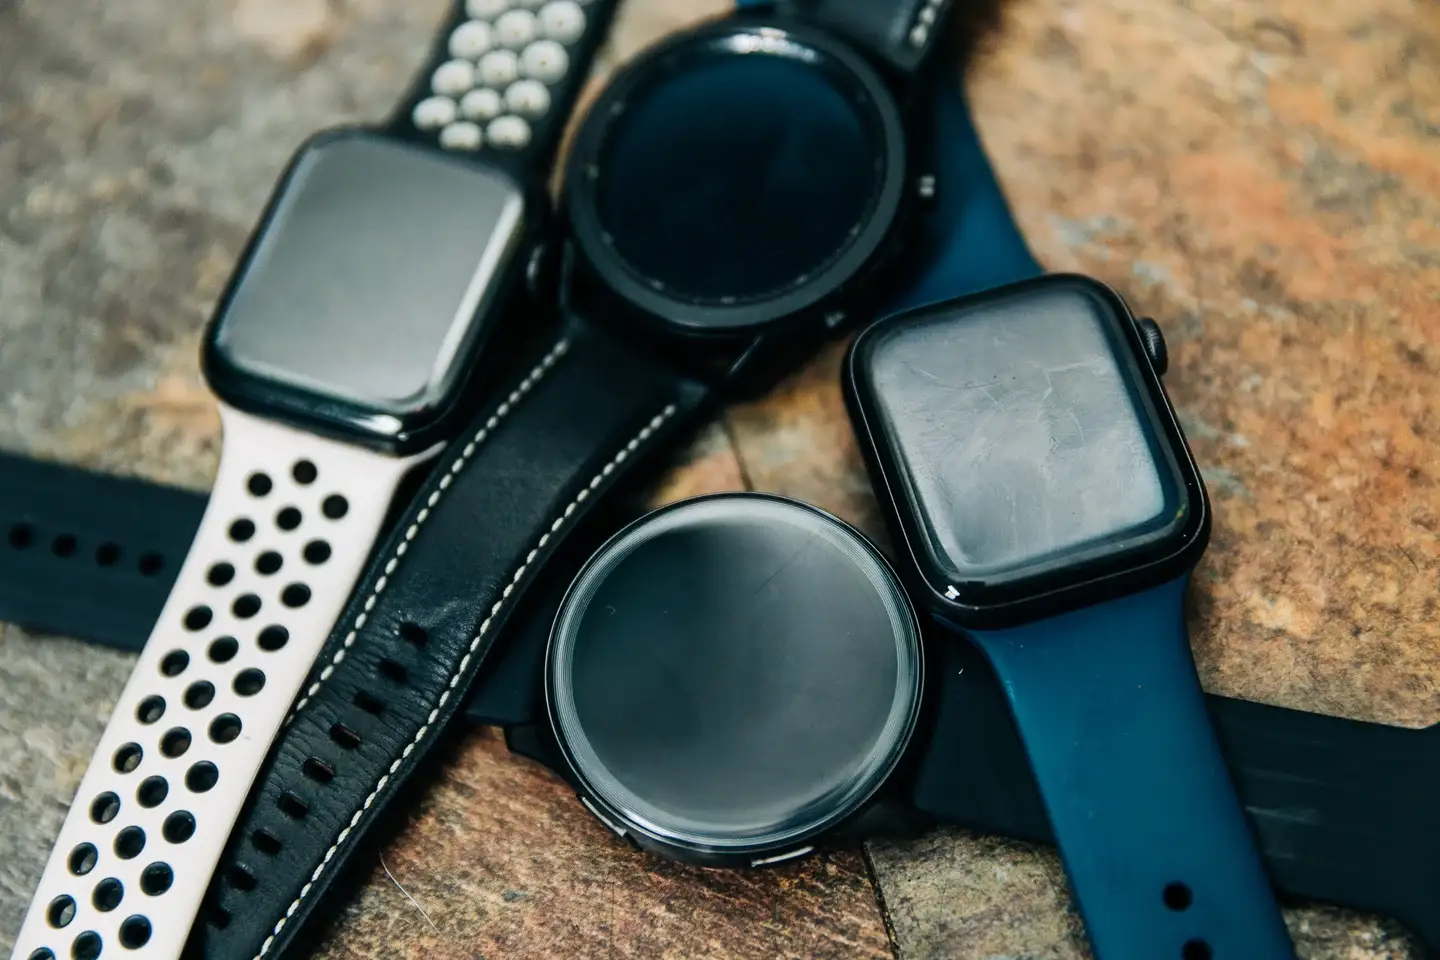 The Ultimate Guide to Choosing the Best Smartwatches for Your Needs - With Users FAQs